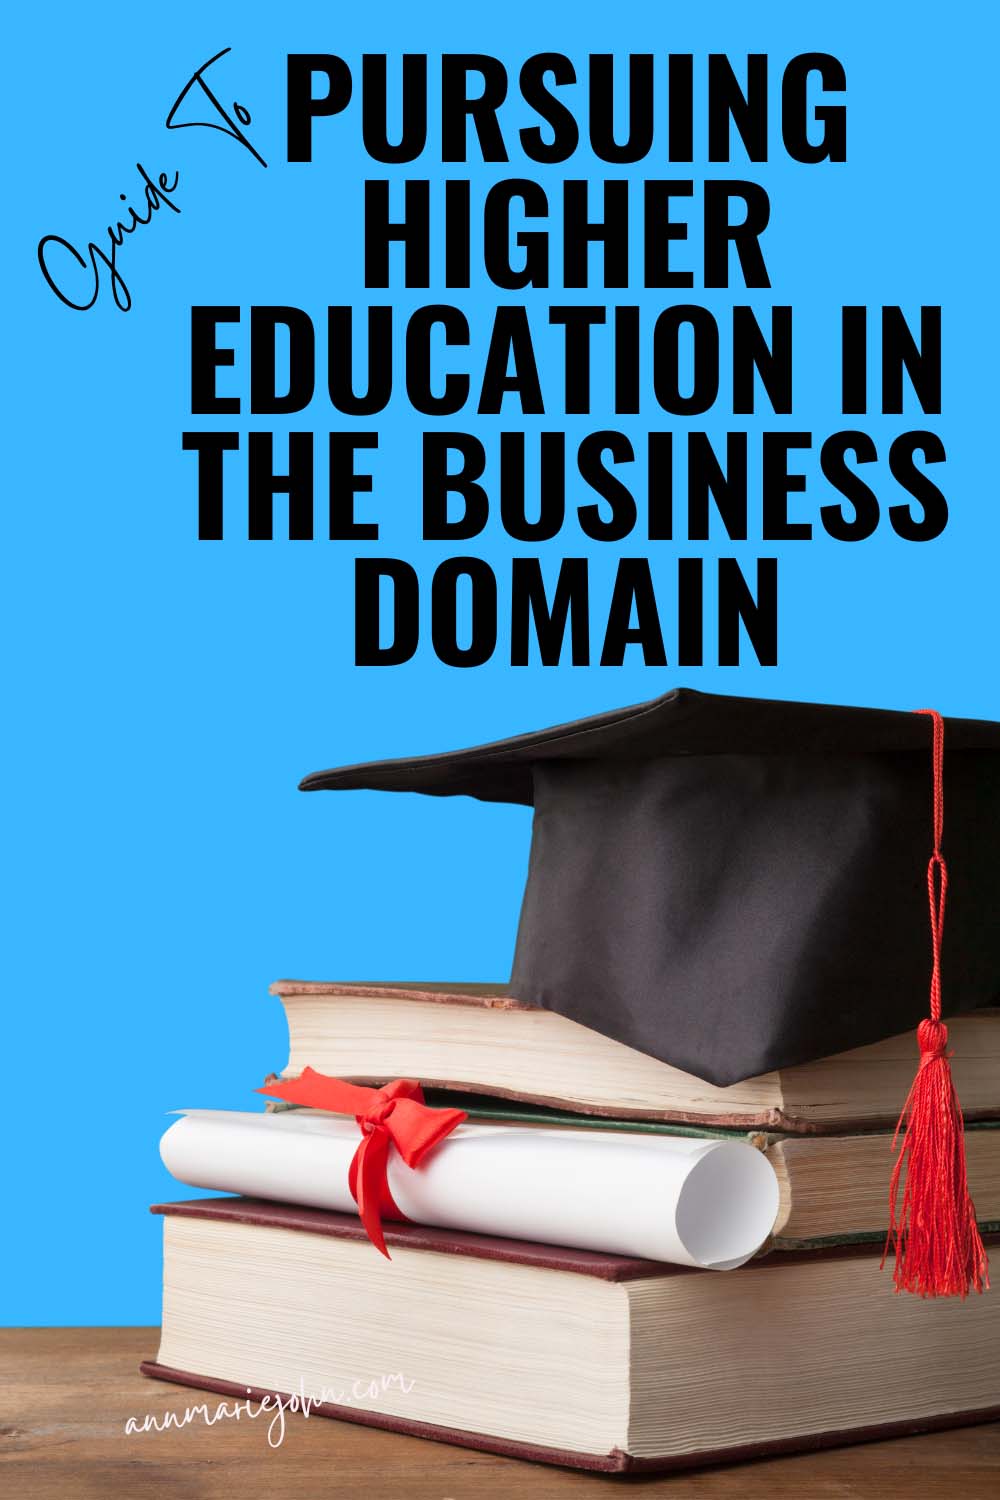 Pursuing Higher Education in the Business Domain